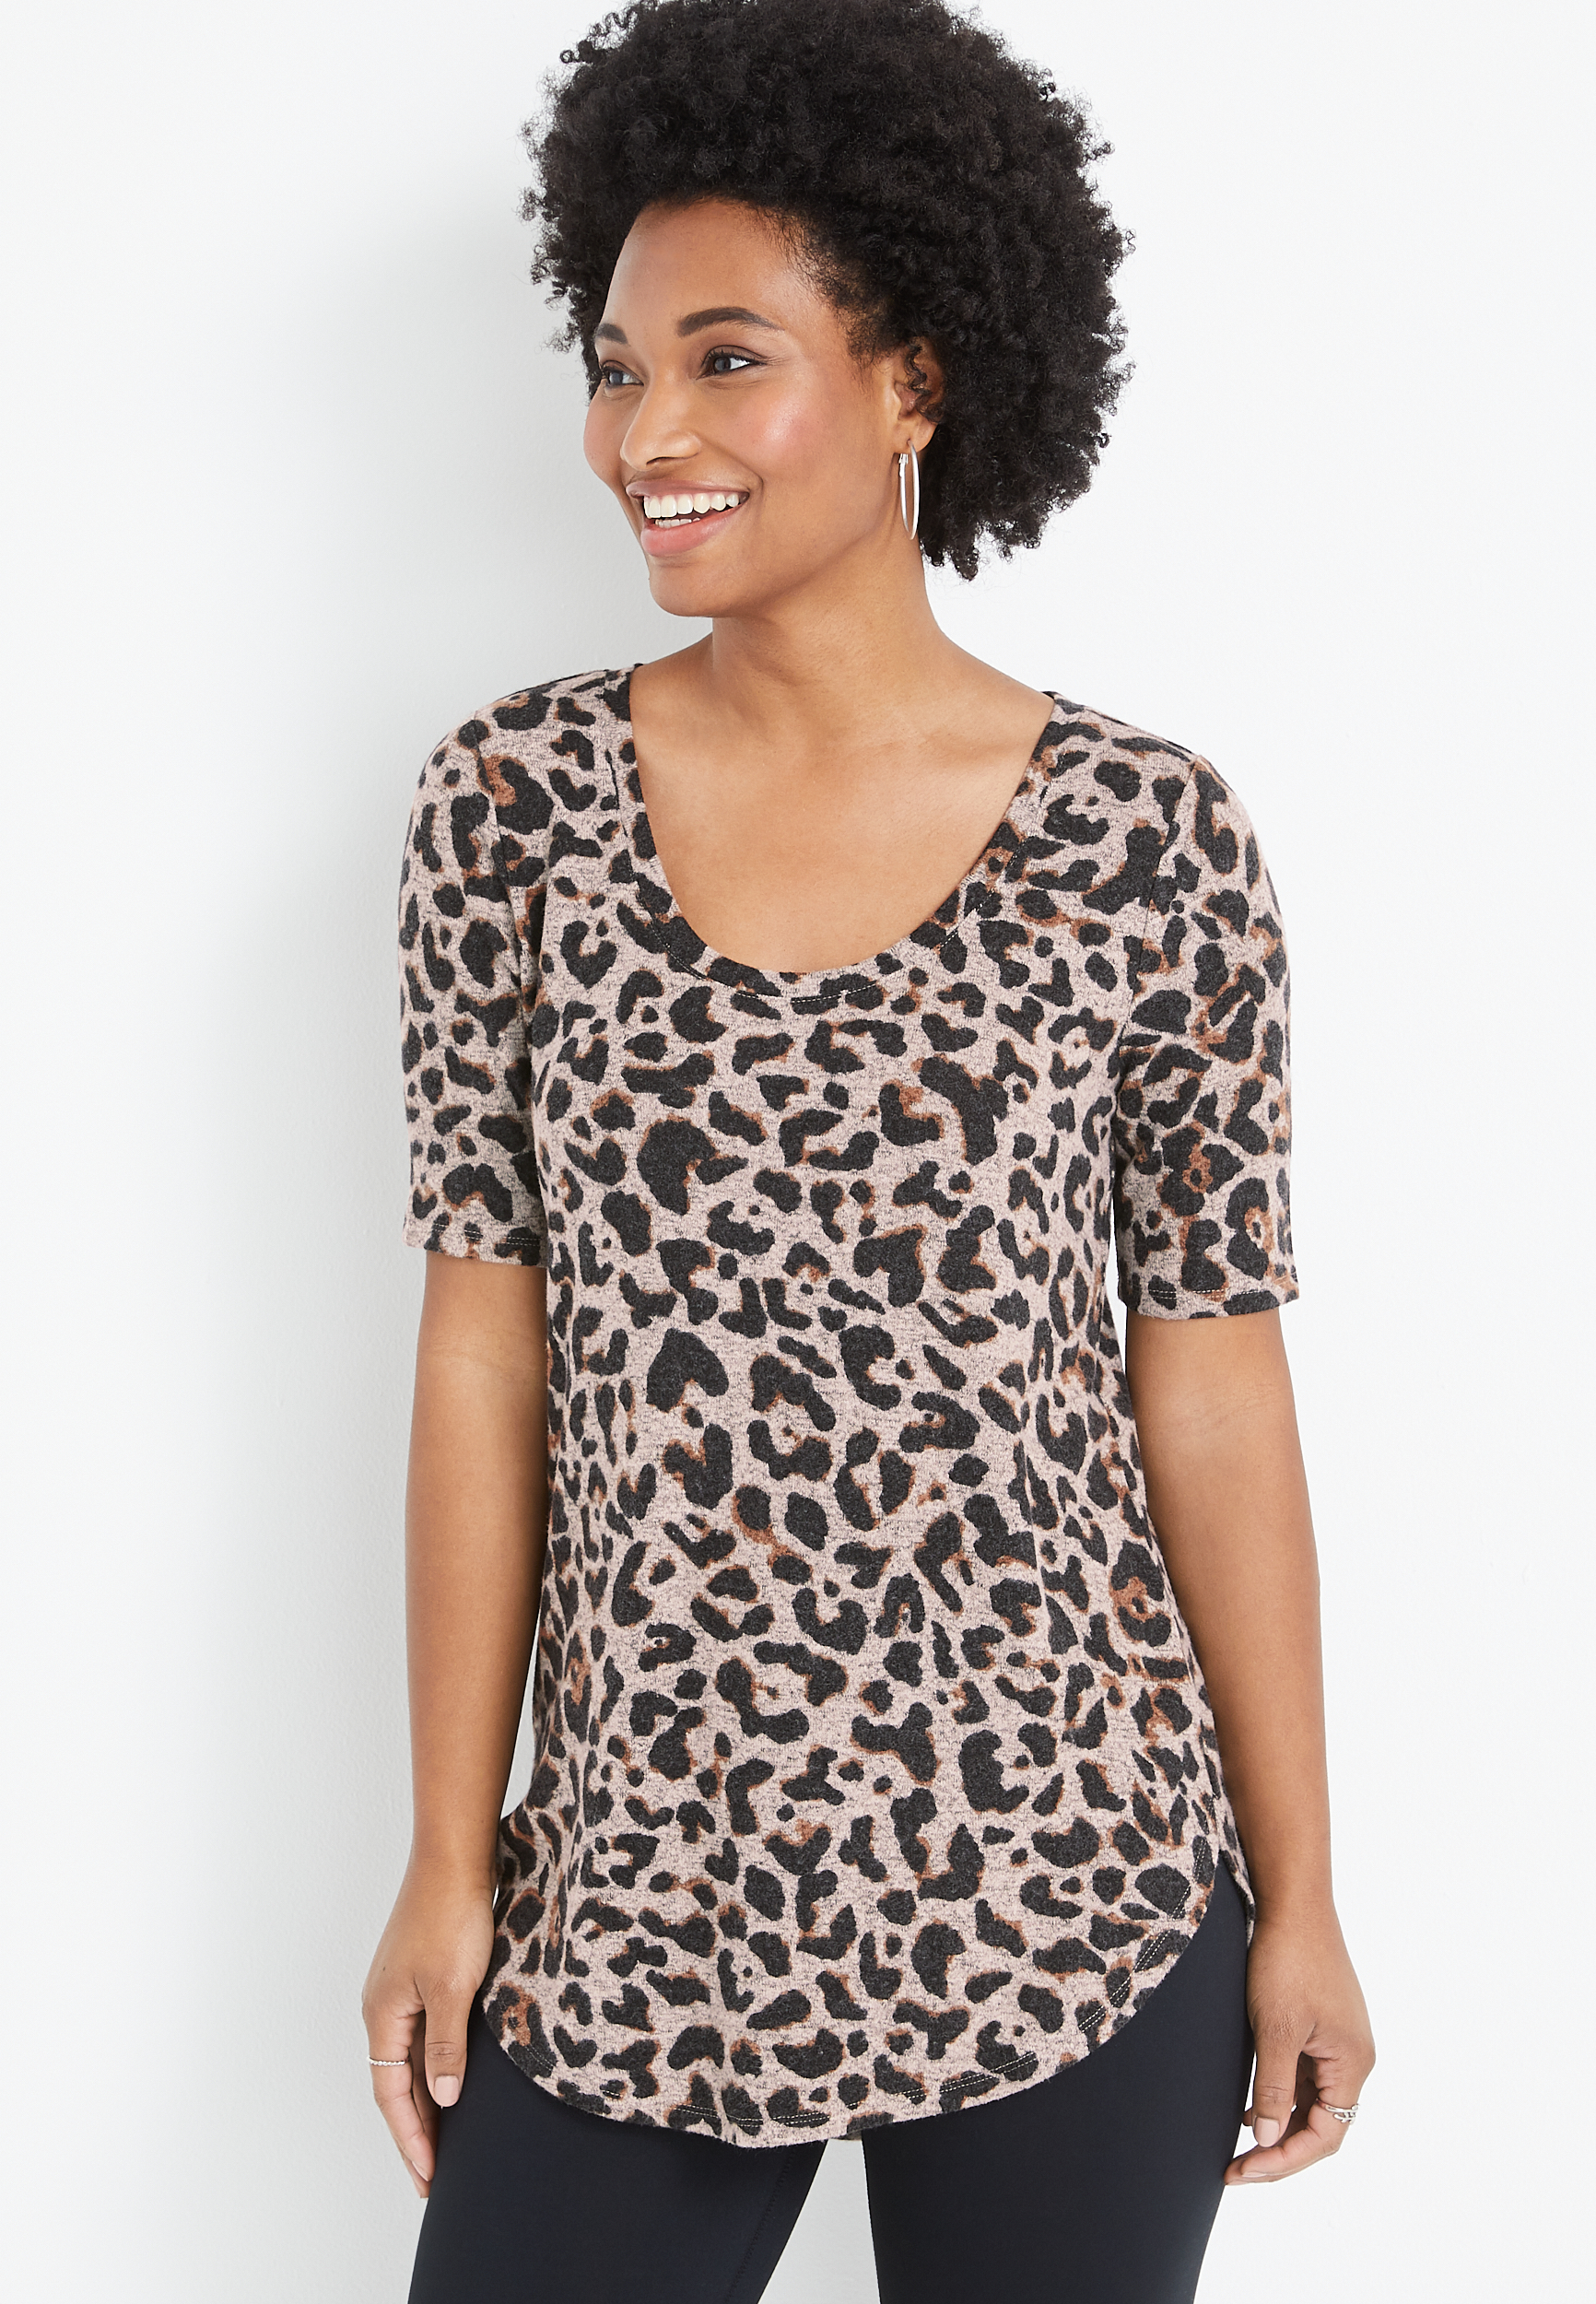 24/7 Flawless Leopard Tunic Tee | maurices